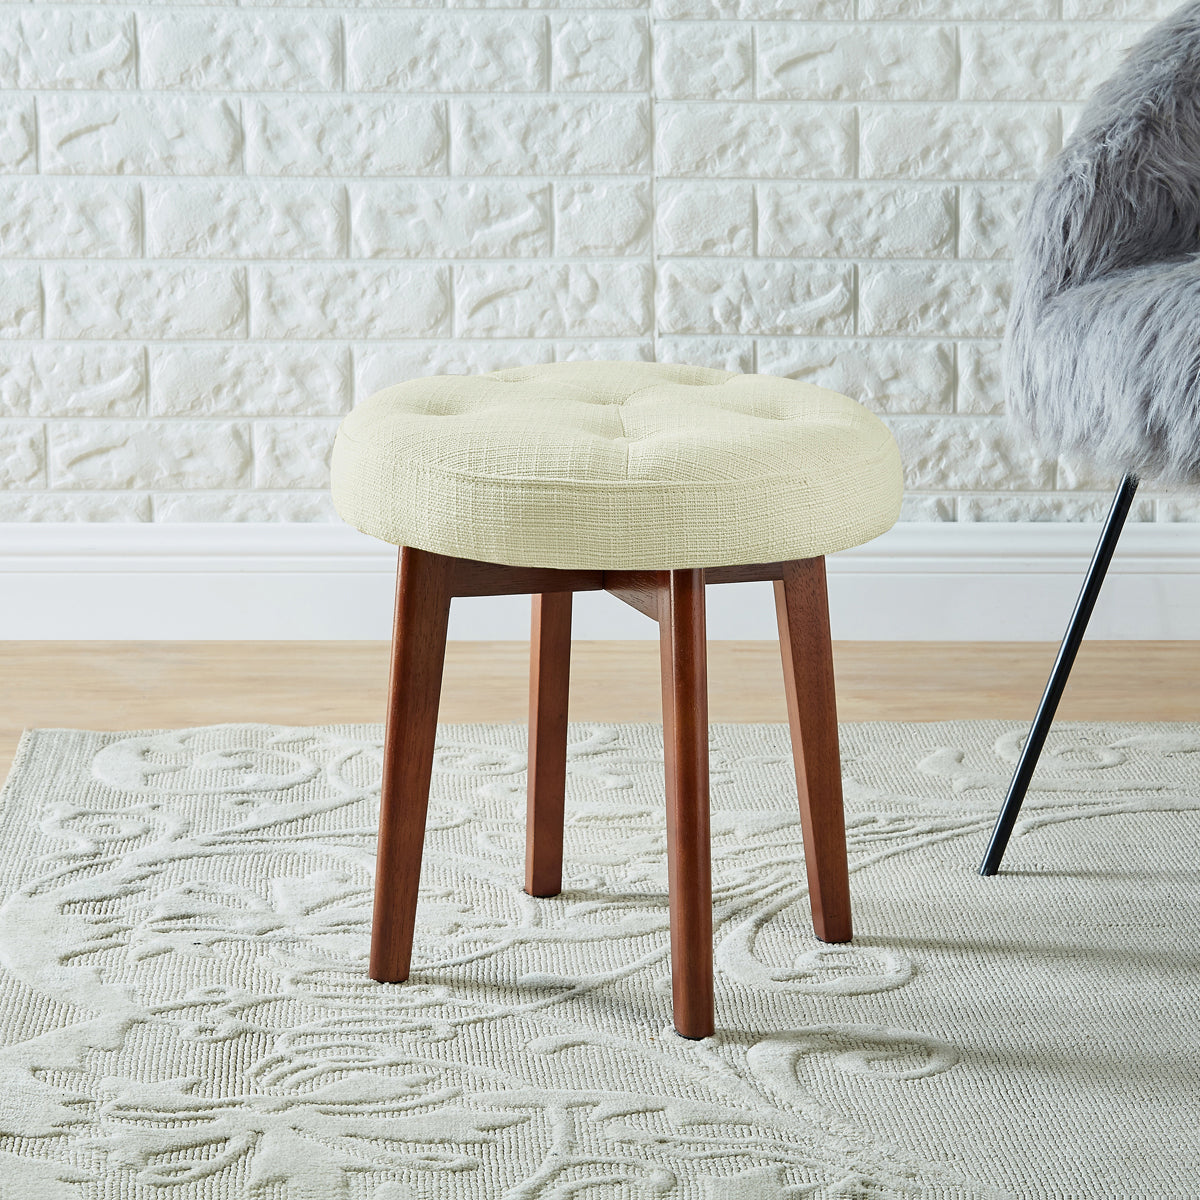 Linen Tufted Round Ottoman with Solid Wood Leg, Upholstered Padded Sto –  24KFurniture